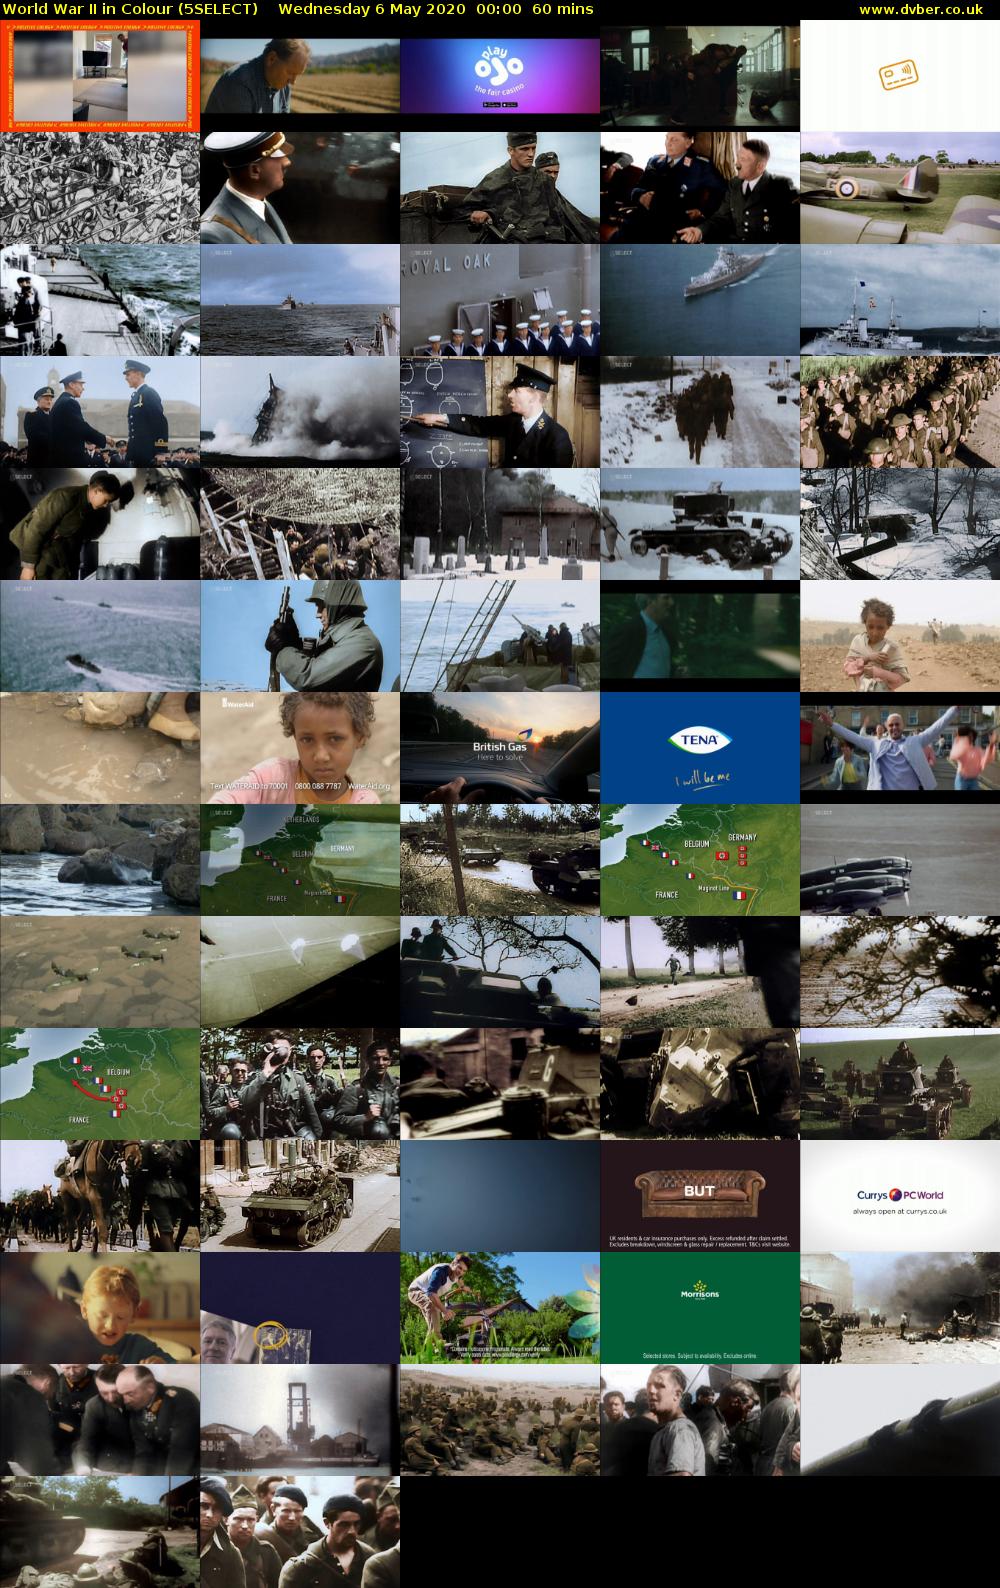 World War II in Colour (5SELECT) Wednesday 6 May 2020 00:00 - 01:00